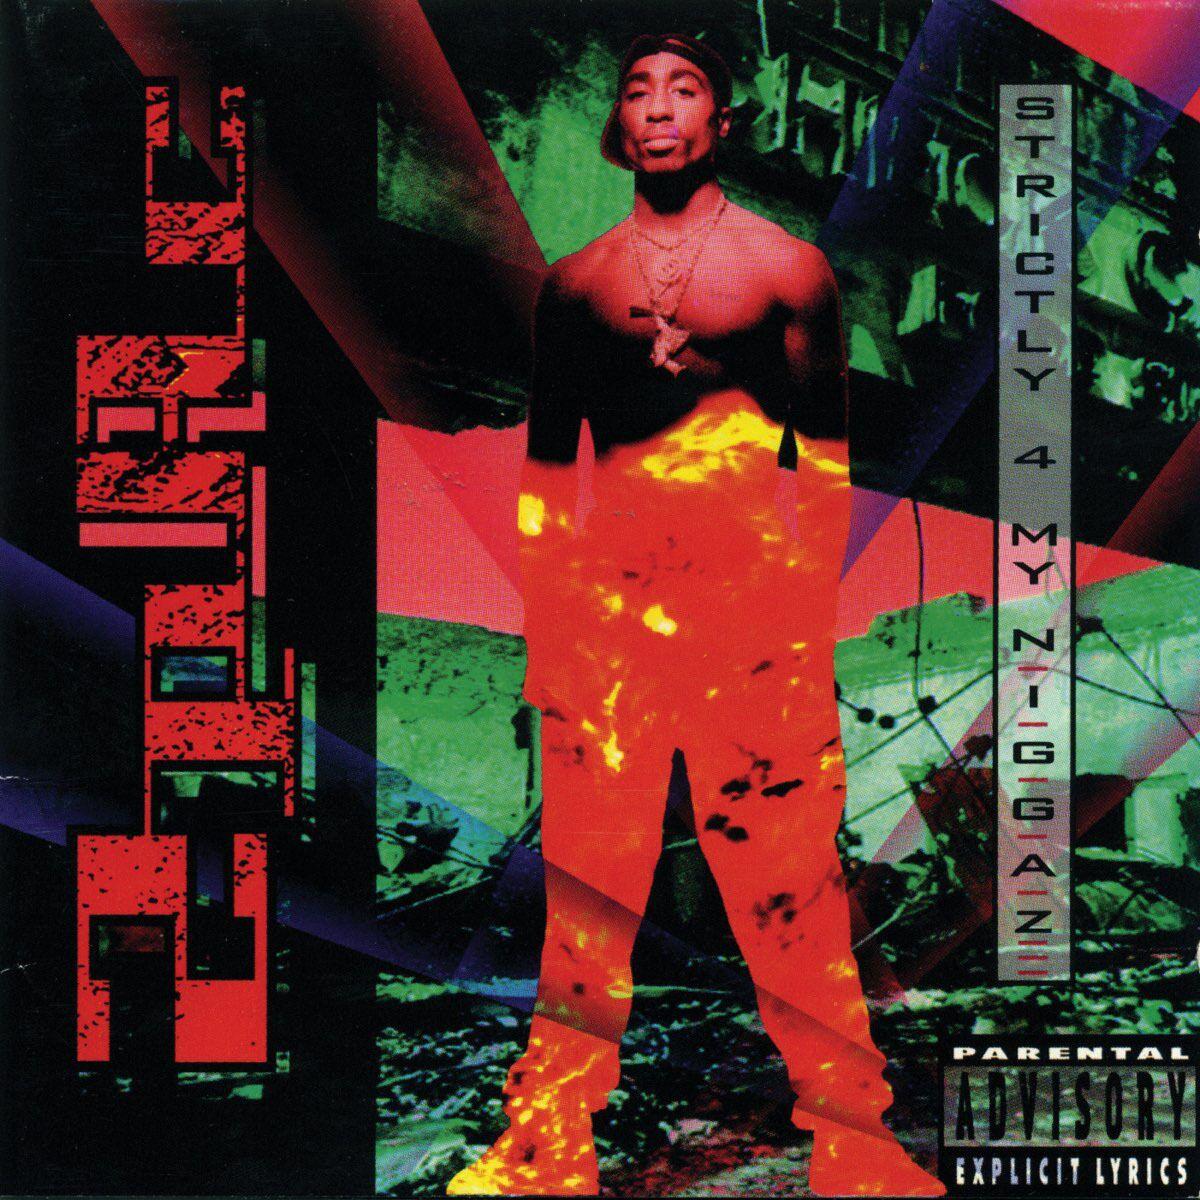 2Pac Strictly 4 My N.I.G.G.A.Z… (25th Anniversary Edition) 2LP